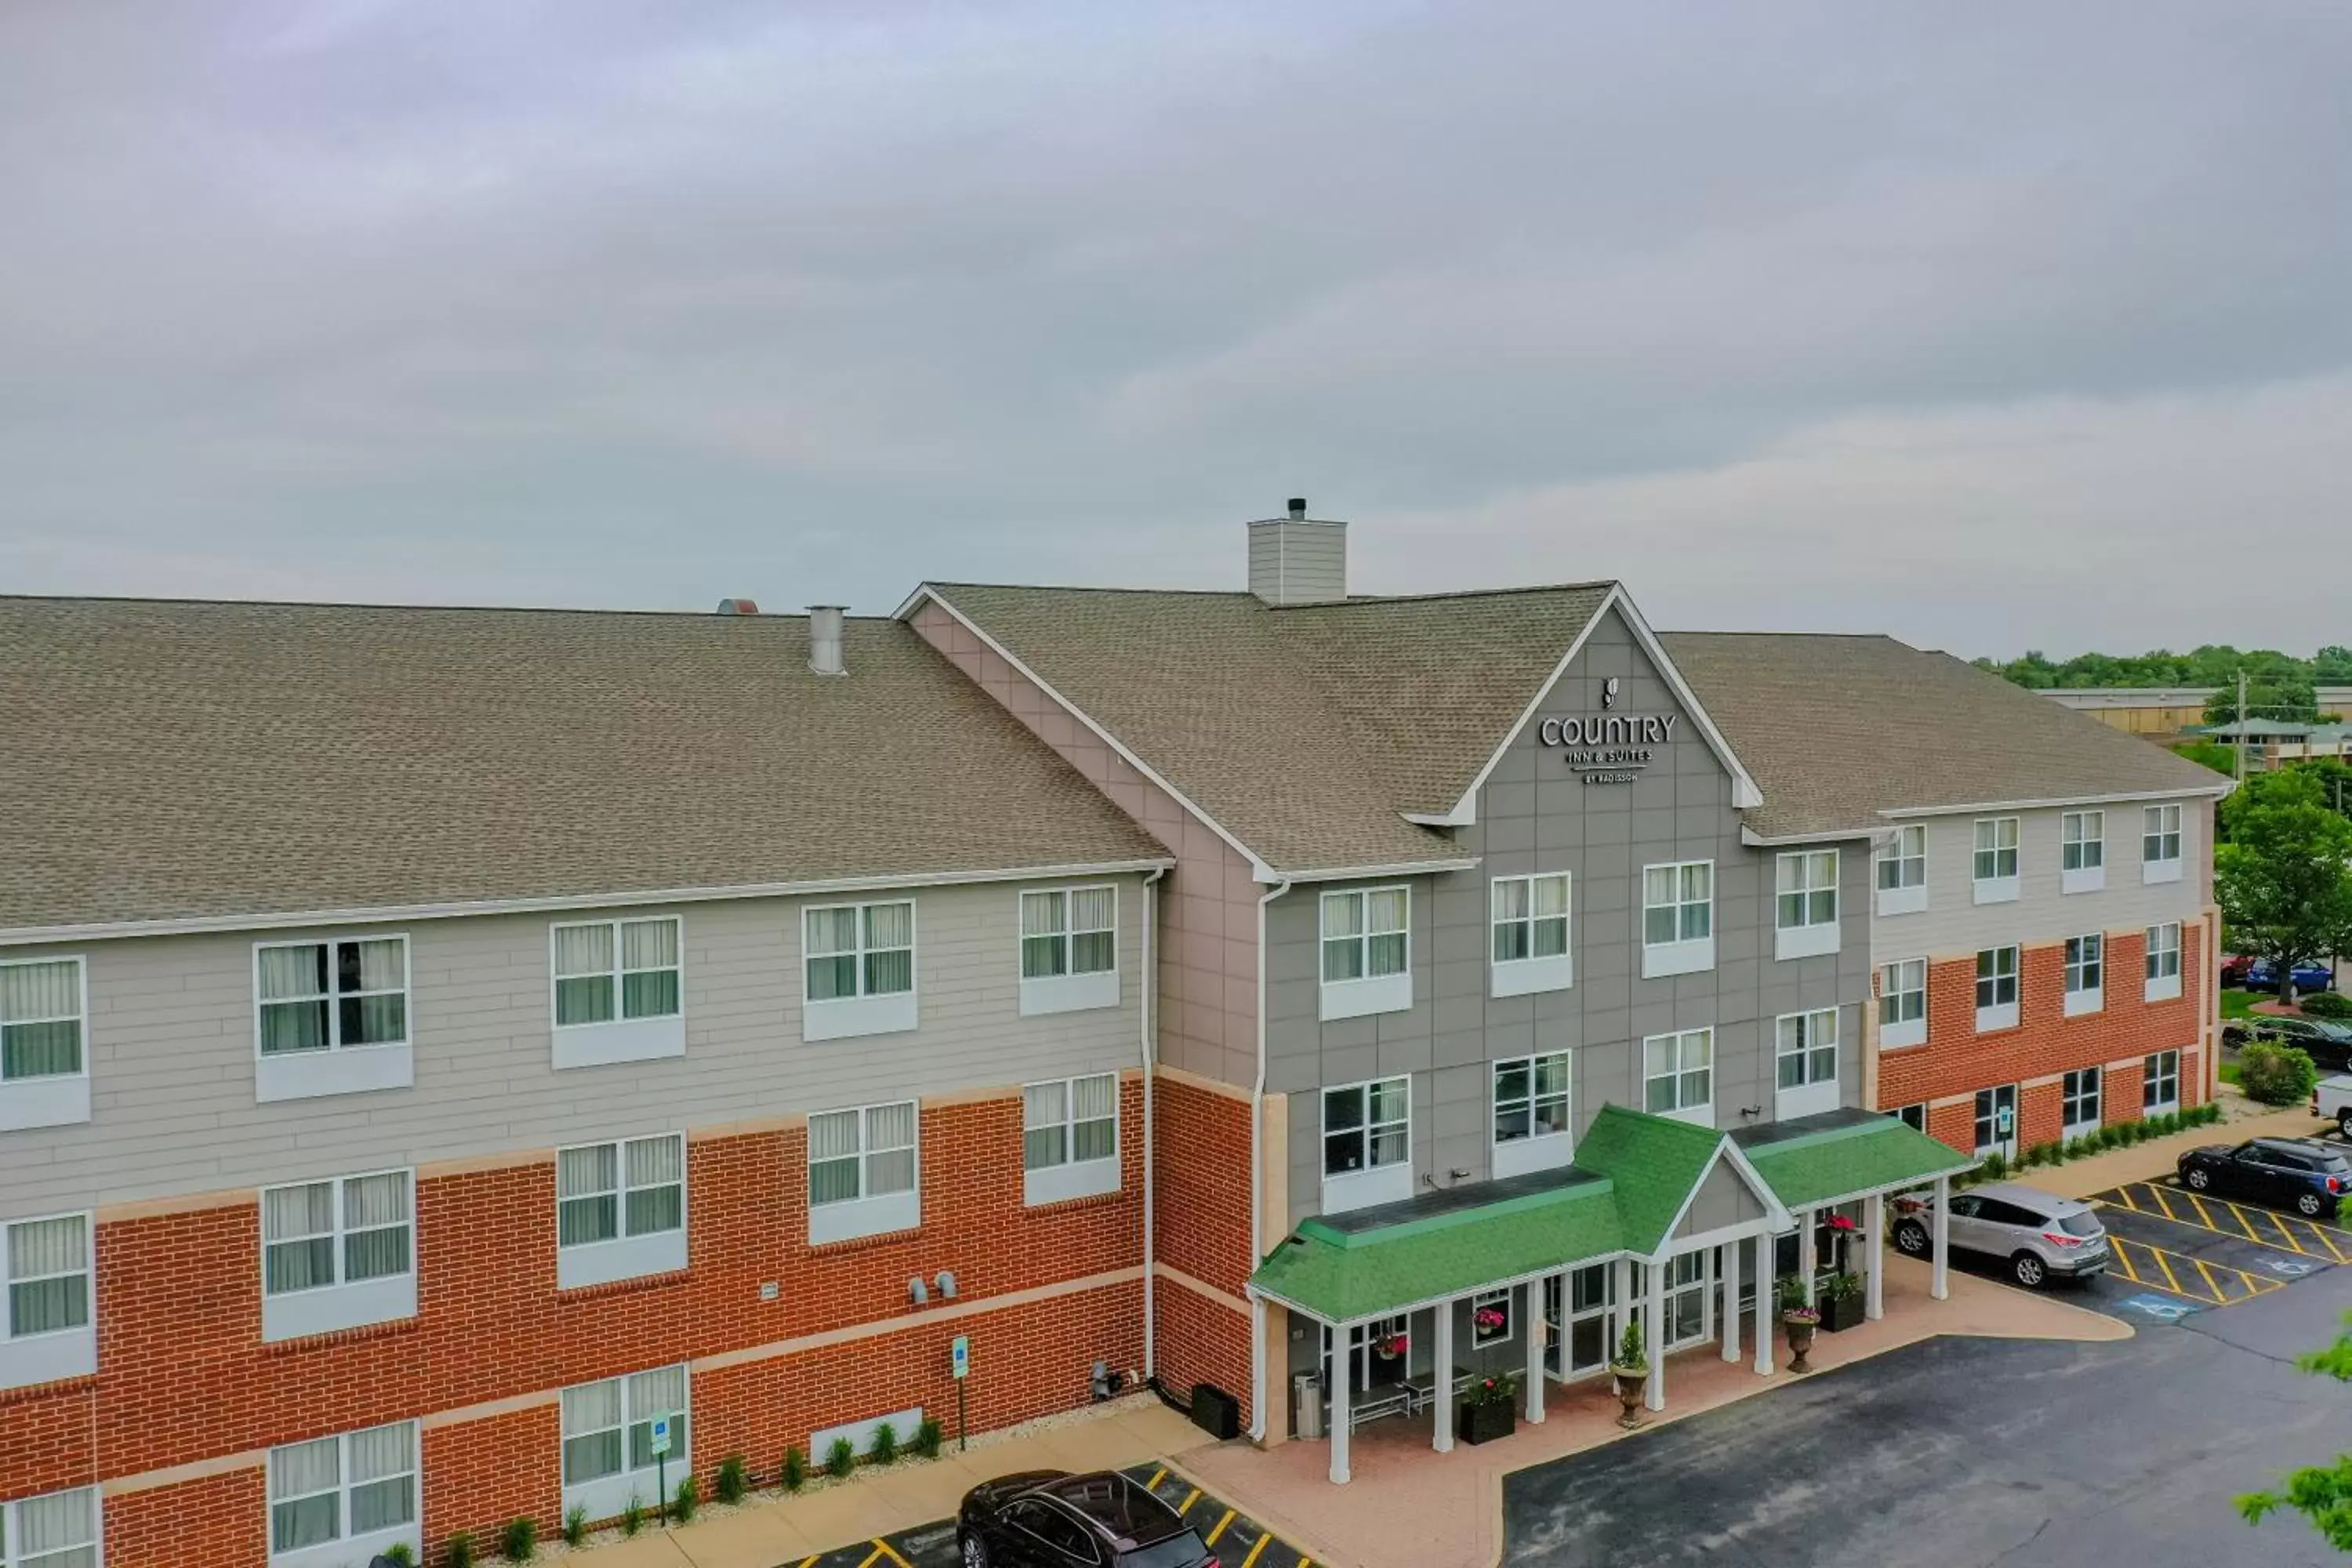 Property Building in Country Inn & Suites by Radisson, Crystal Lake, IL